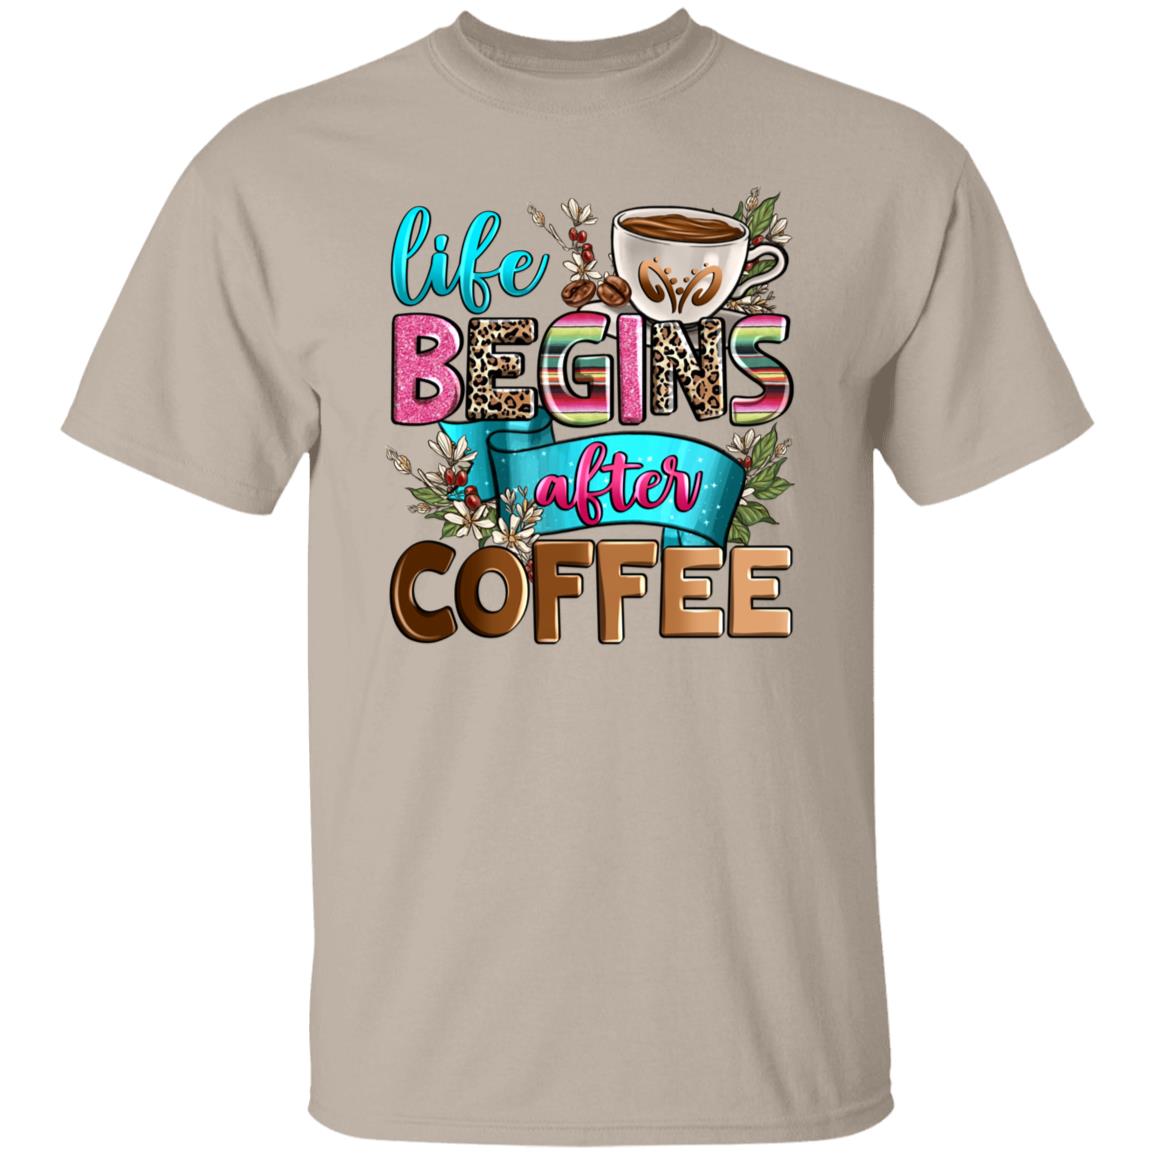 Life begins after coffee T-Shirt gift Morning Coffee lover Unisex Tee Sand White Sport Grey-Family-Gift-Planet